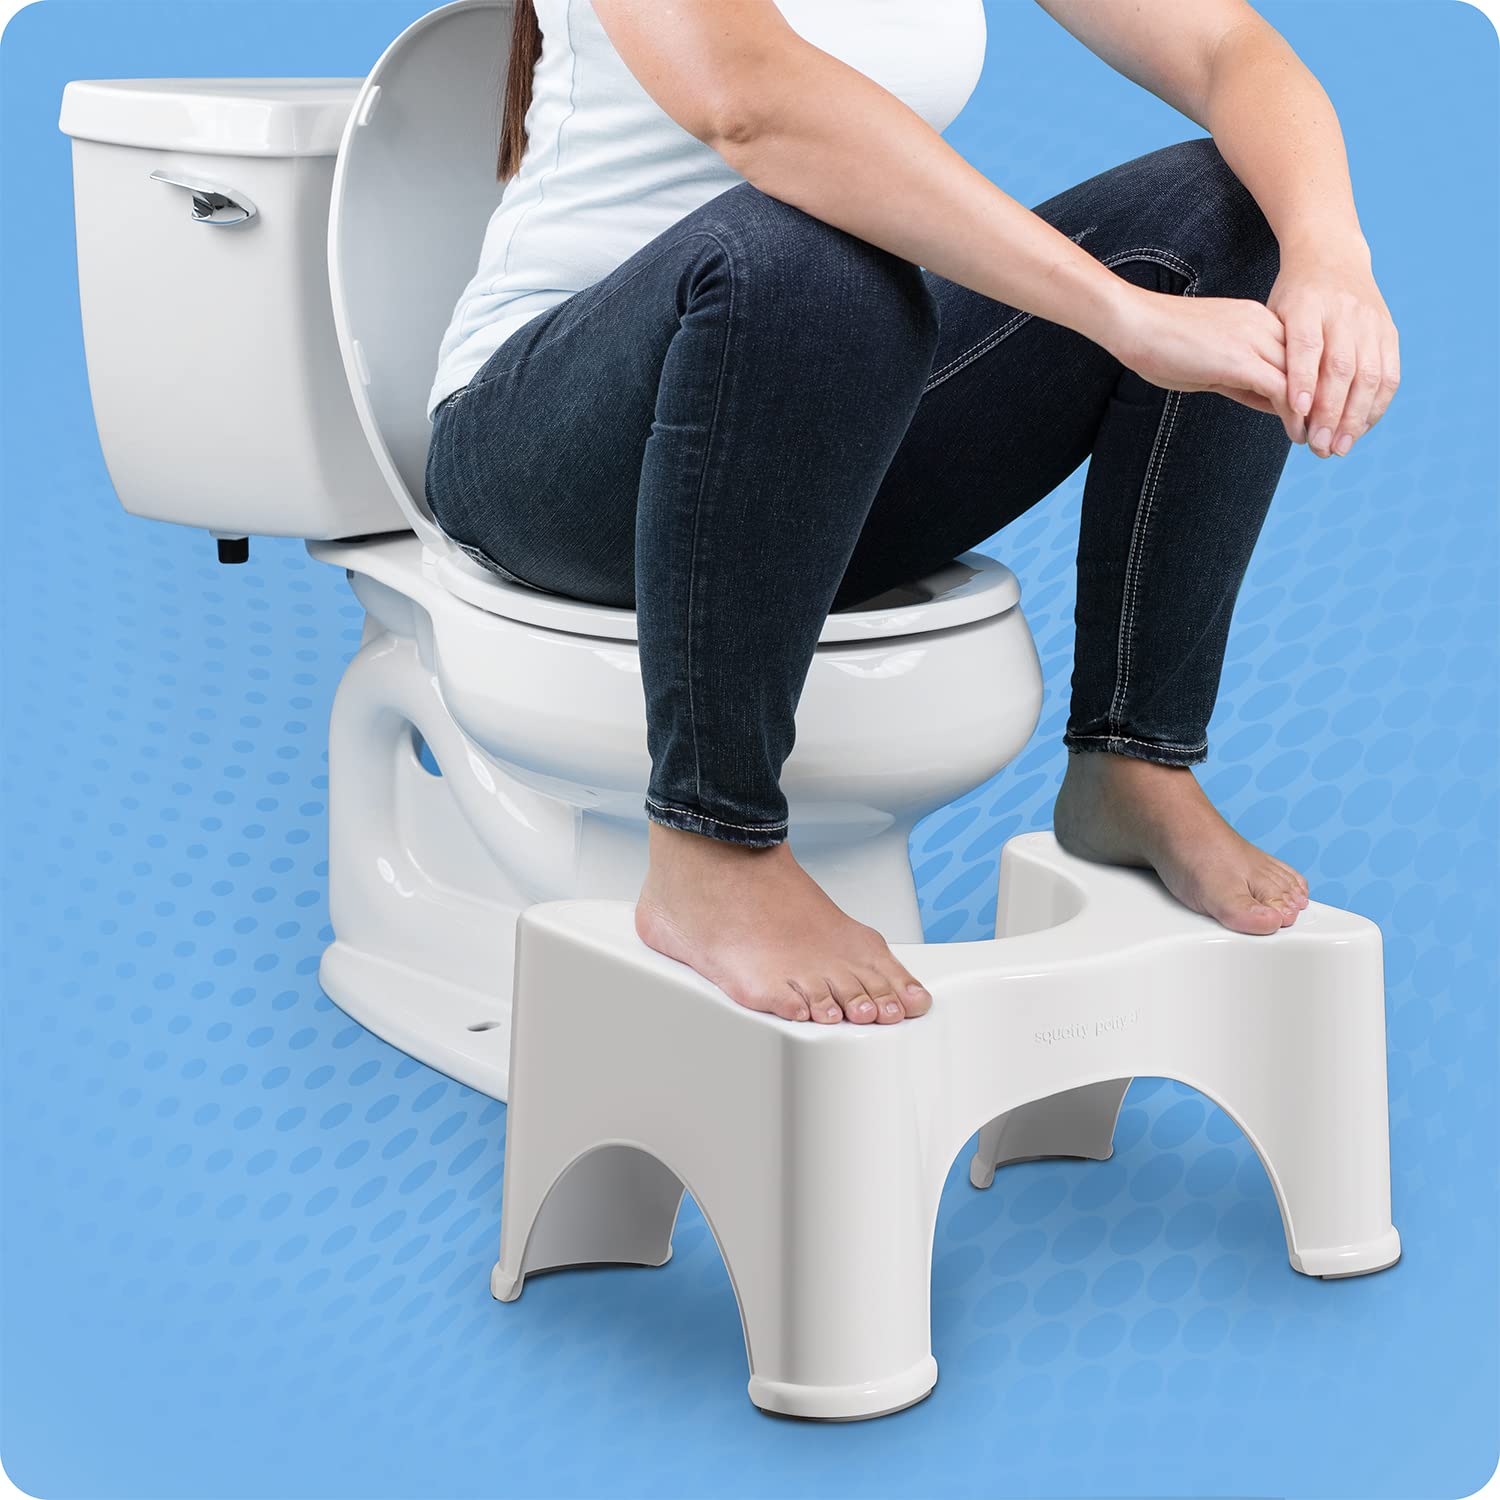 Squatty Potty The Original Bathroom Toilet Stool Height, White, 9 Inch (Pack of 1)